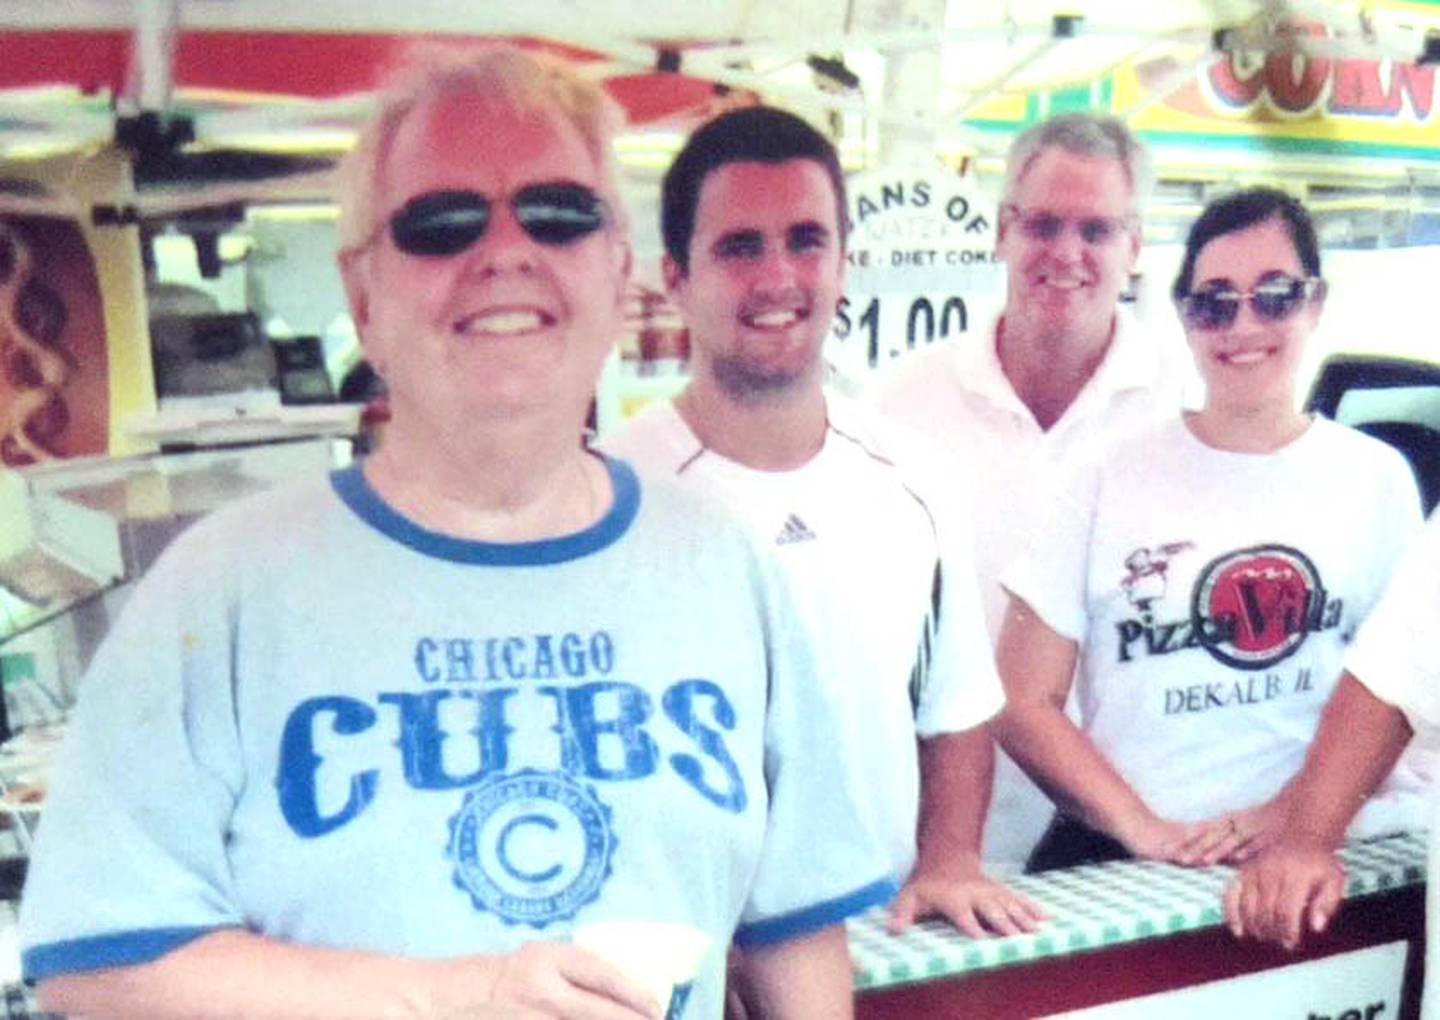 Larry Finn, co-owner of Pizza Villa in DeKalb, died unexpectedly at age 76 on Tuesday, Dec. 14, 2021. (From left to right): Larry Finn, nephew CJ Finn, brother John Finn at DeKalb Corn Fest in the early 2010s (Photo provided by CJ Finn).